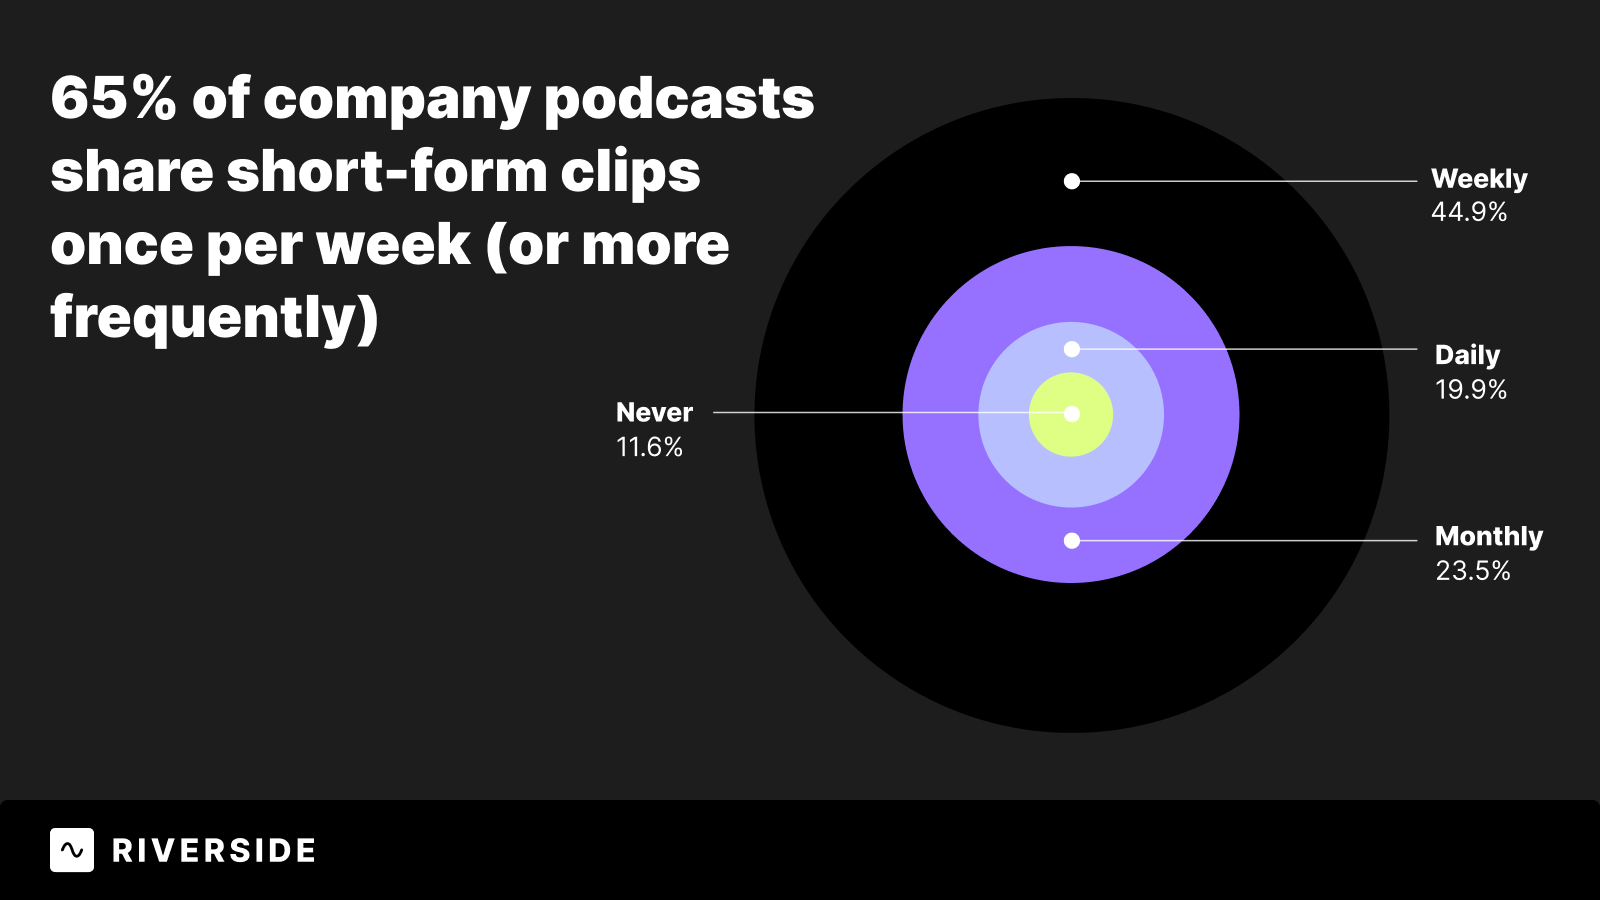 Percentage of companies that share weekly short-form clips to promote their podcast